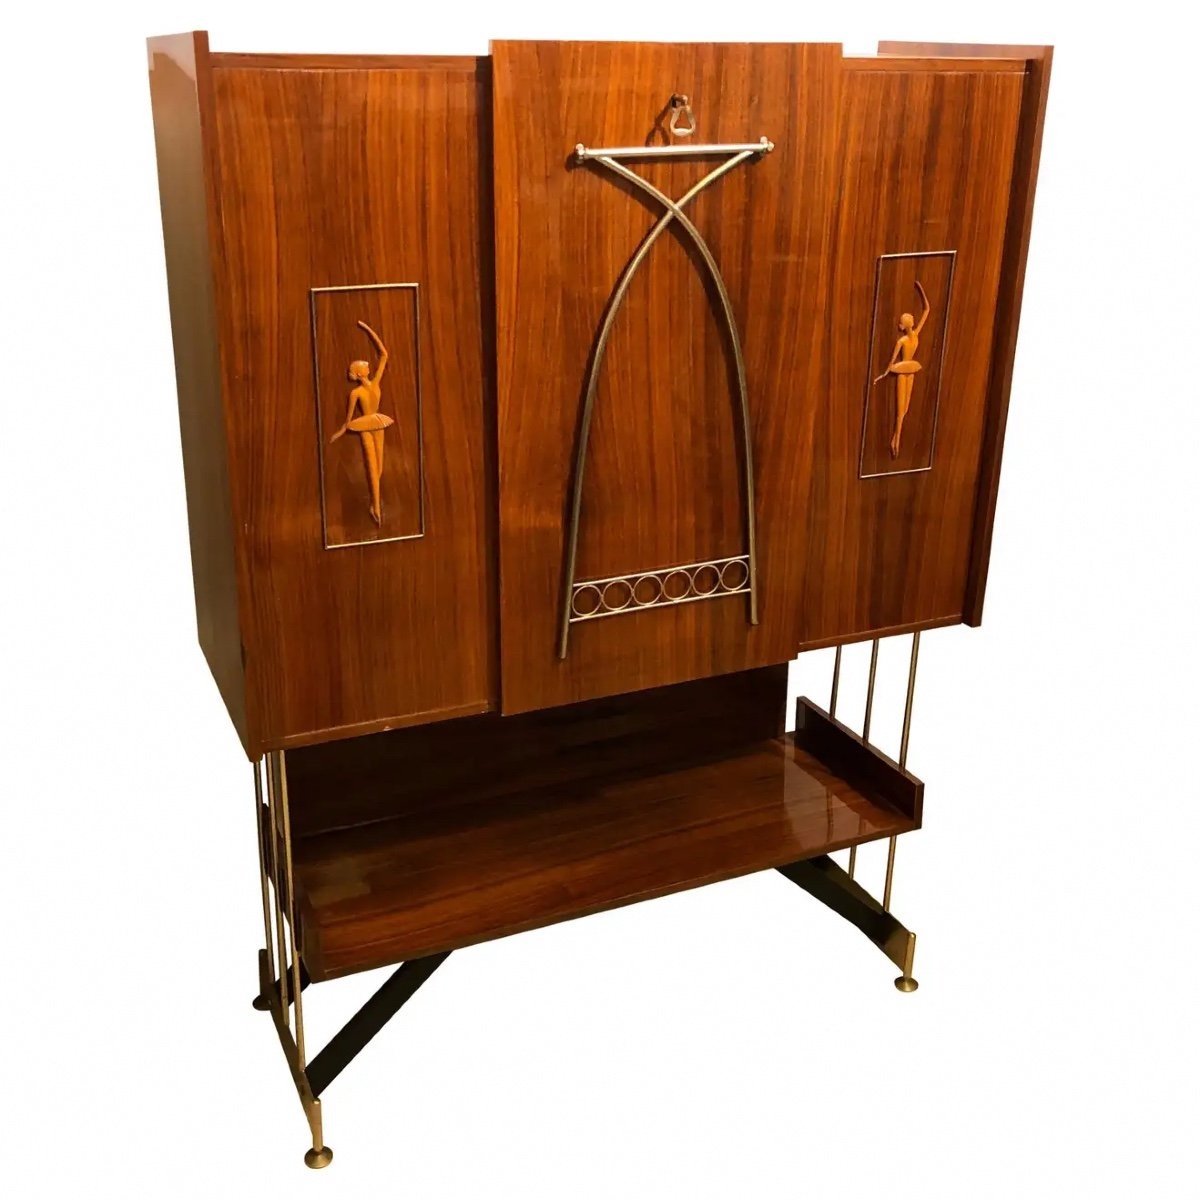 1950s Gio Ponti Style Mid-century Modern Wood And Lacquer Openable Bar Cabinet